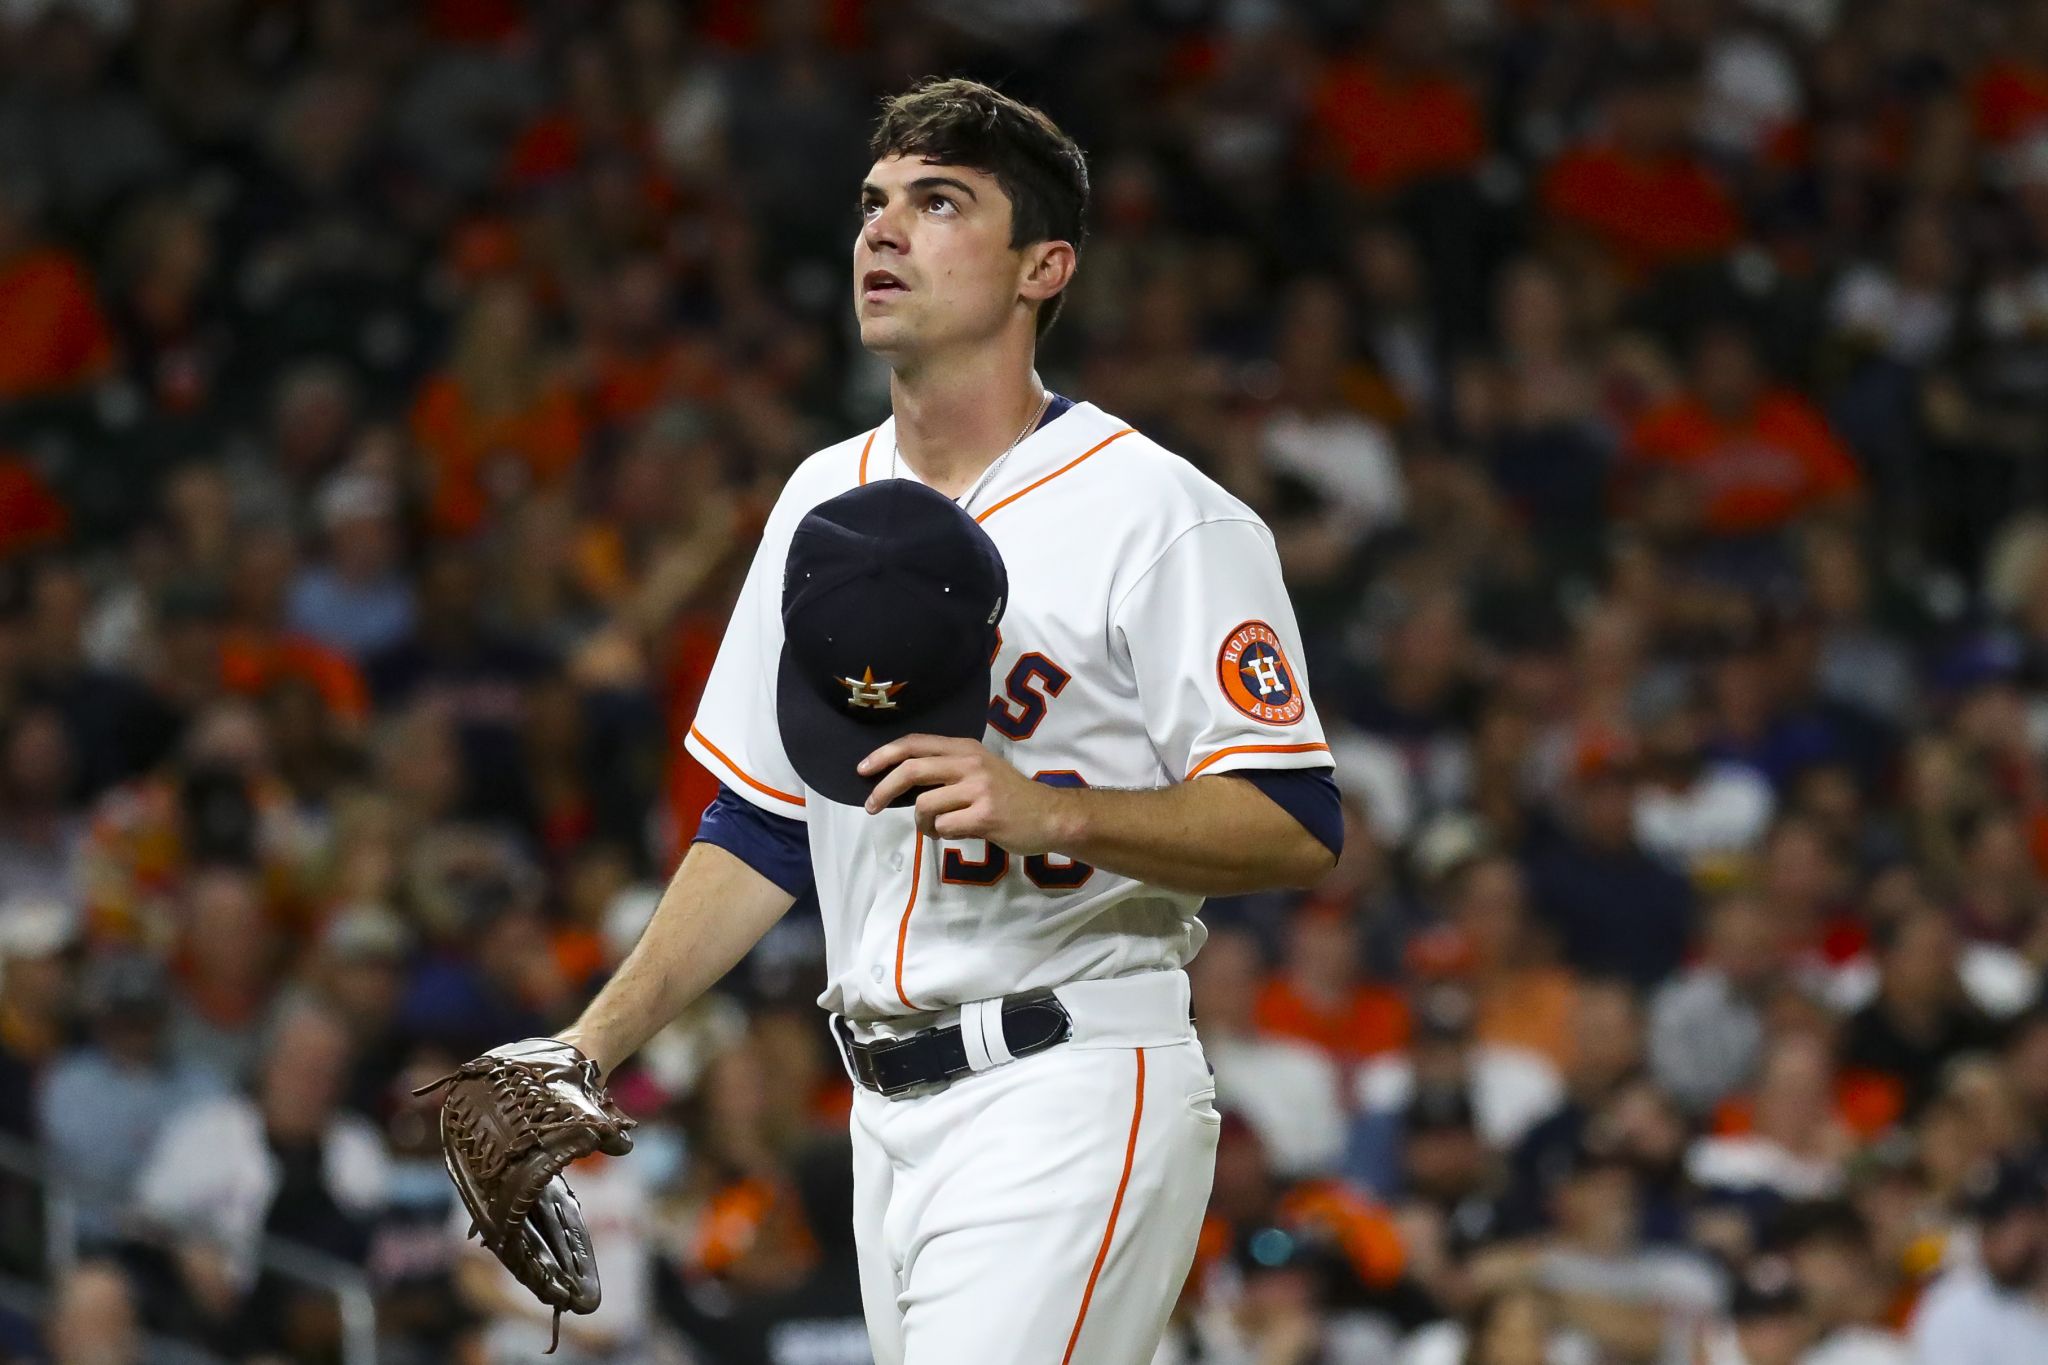 September 2, 2017: Astros return to the field after Hurricane Harvey  strikes Houston – Society for American Baseball Research